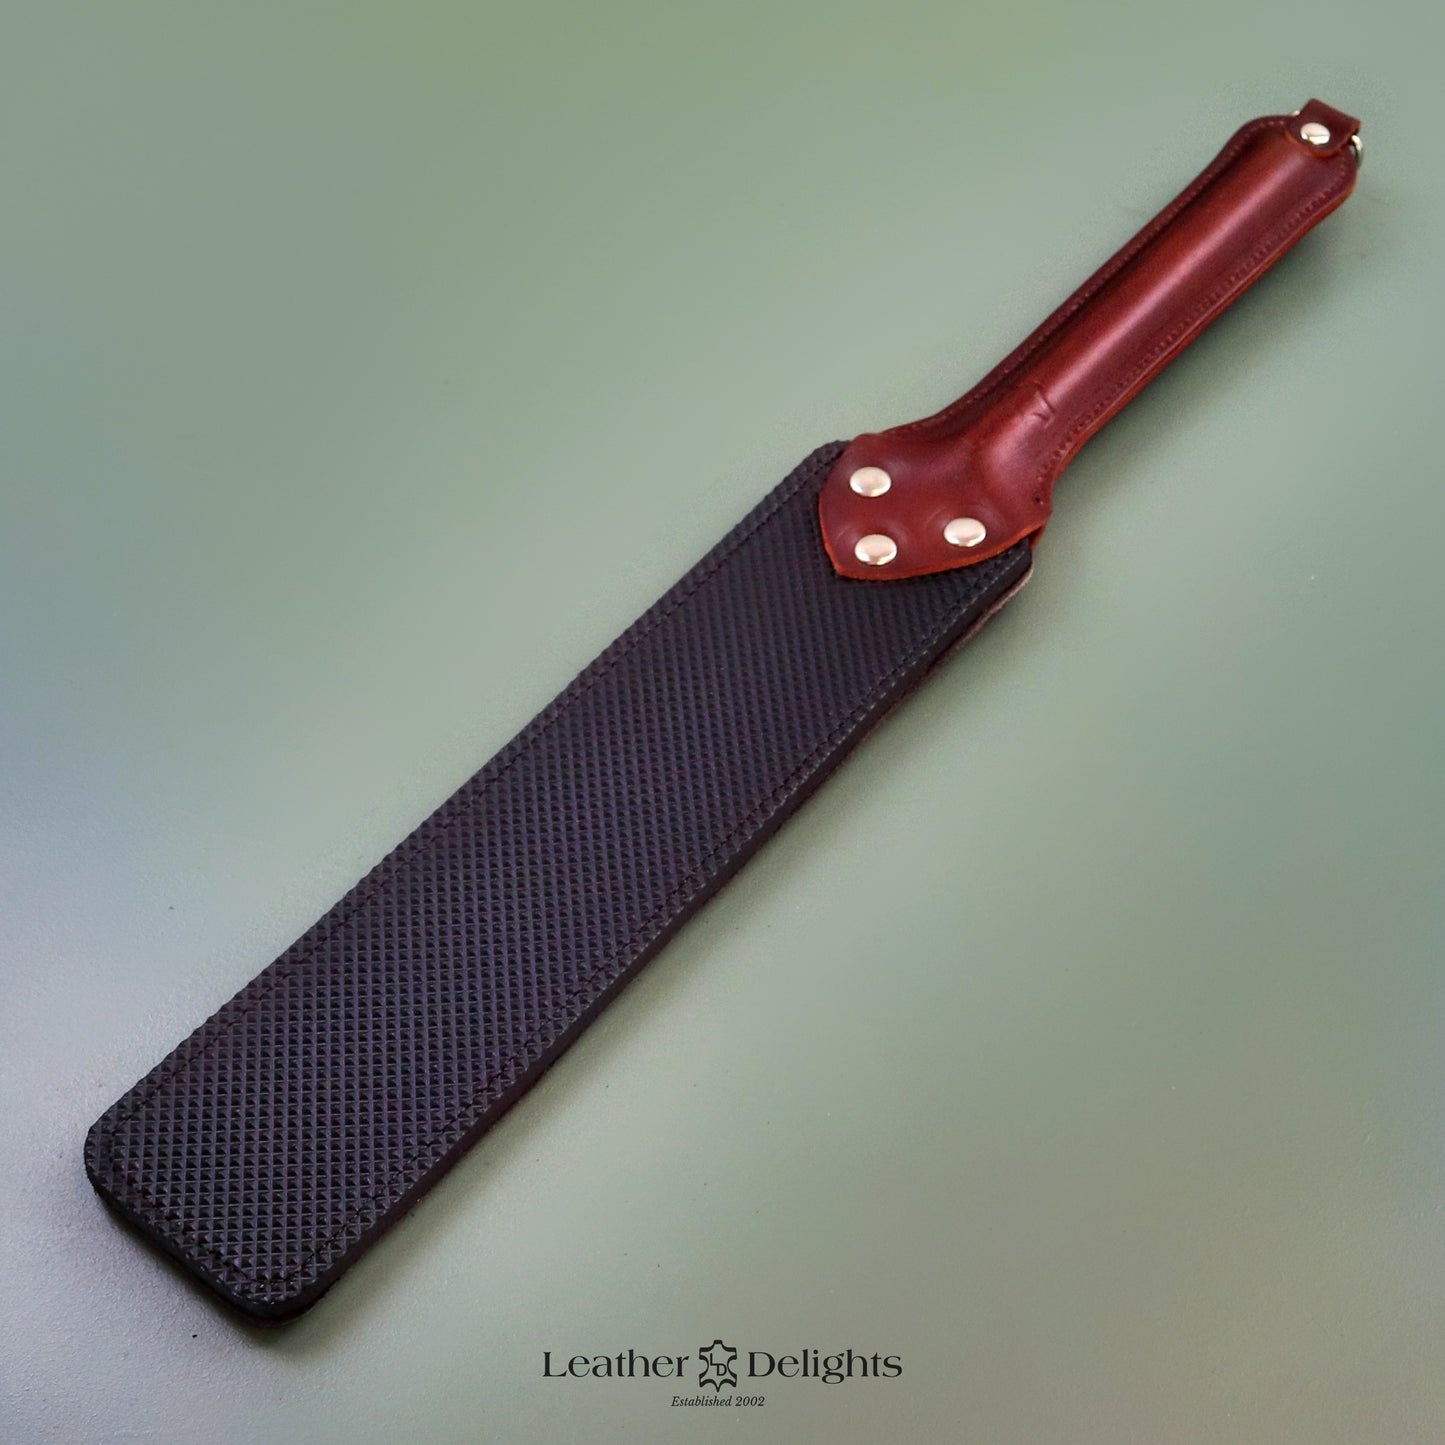 Punishment Paddle - Soft Brown Buffalo Leather & Dimpled Rubber